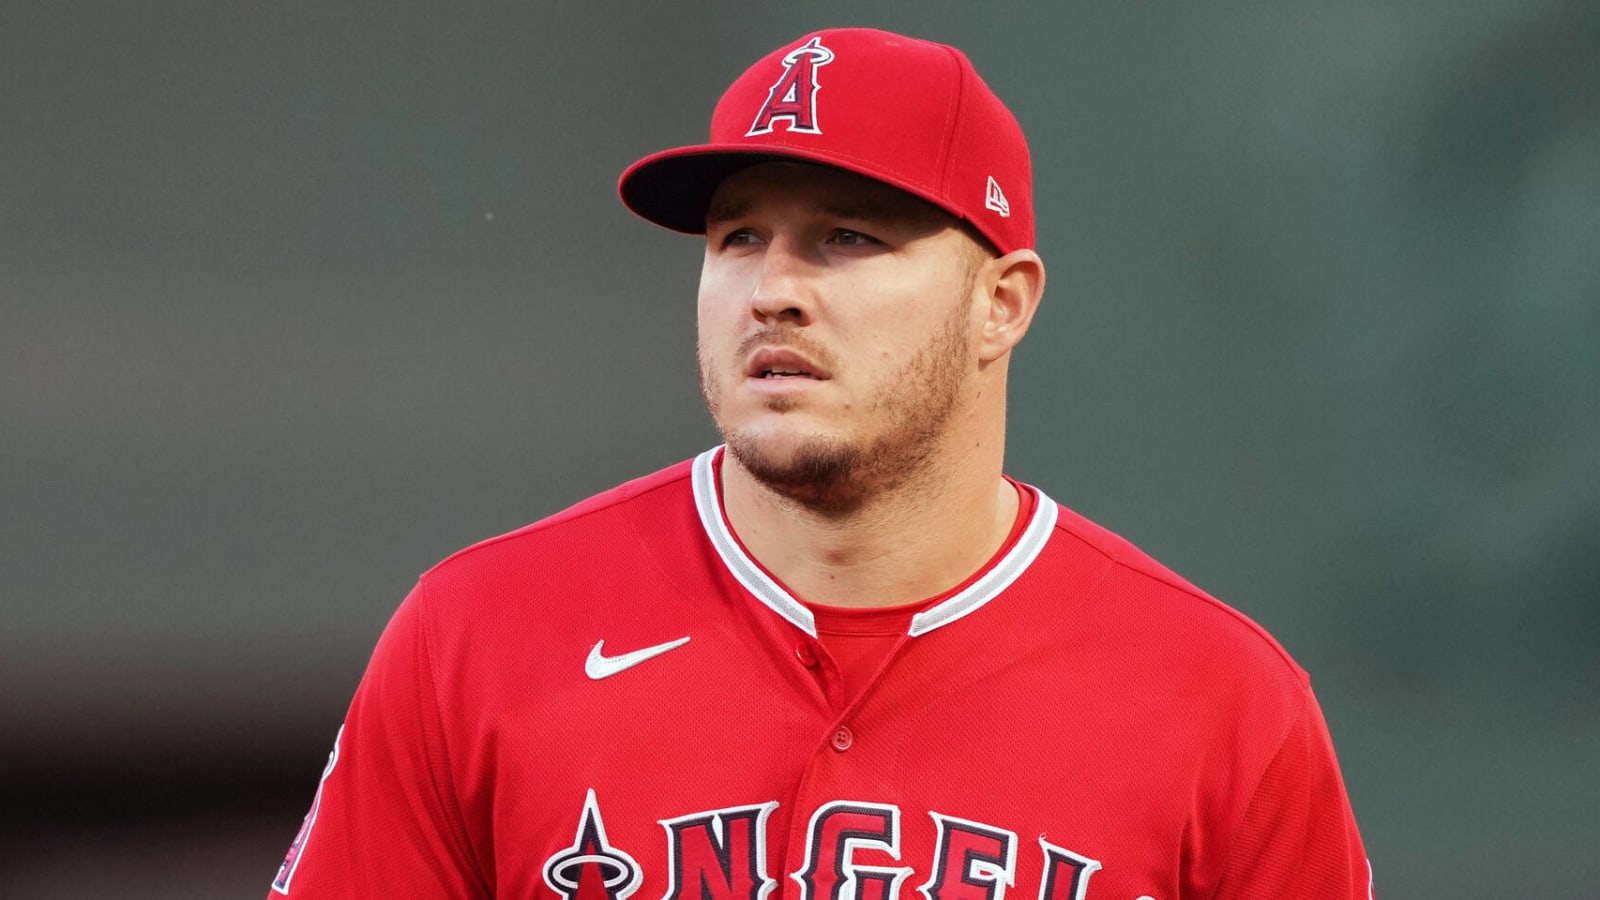 Mike Trout discusses plan to convince Shohei Ohtani to stay